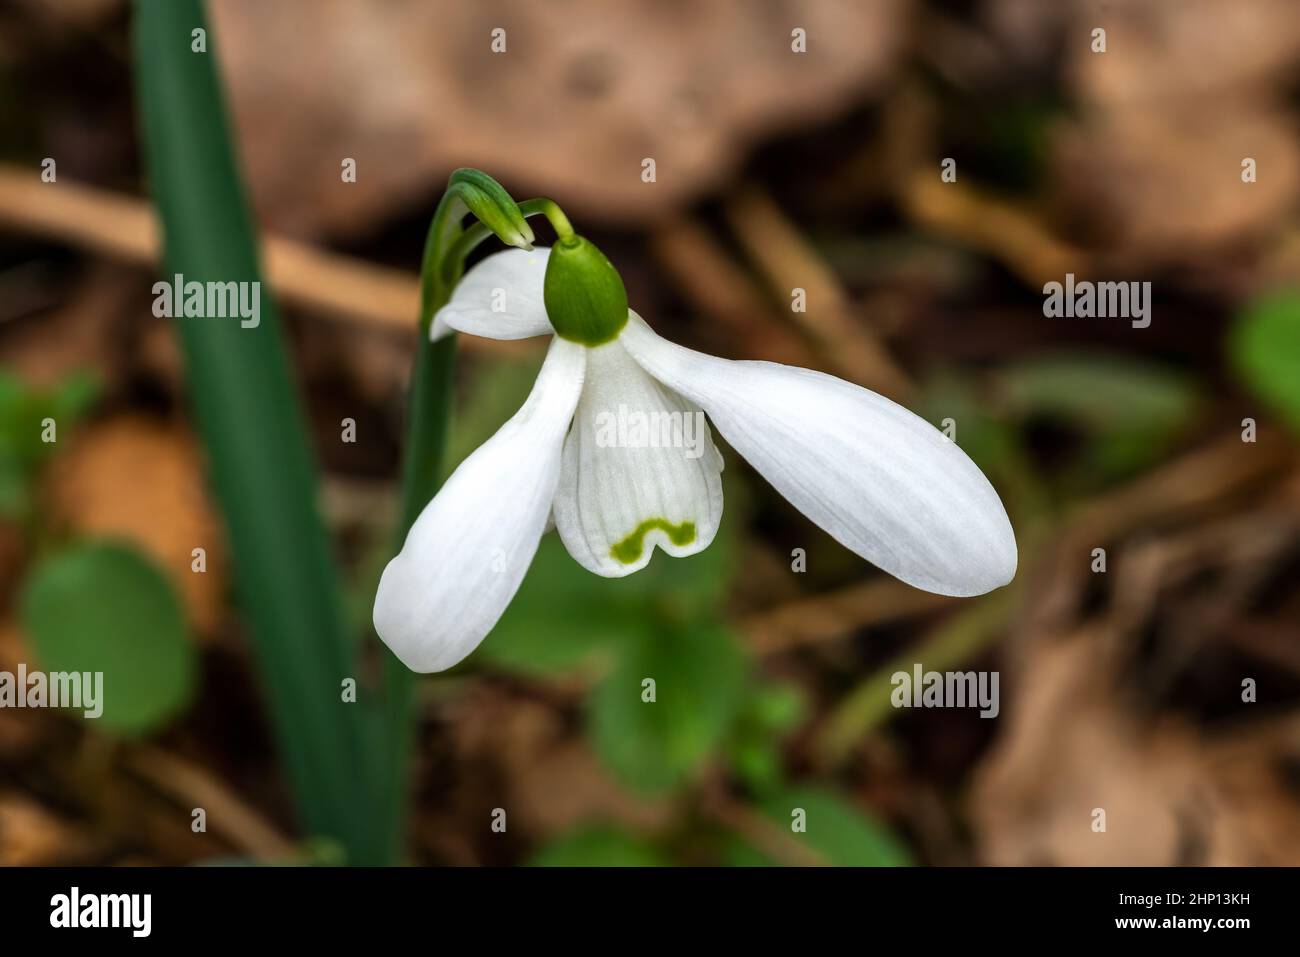 Galanthus 'Brenda Troyle' (snowdrop) a spring winter bulbous flowering plant with a white green springtime flower in January, stock photo image Stock Photo